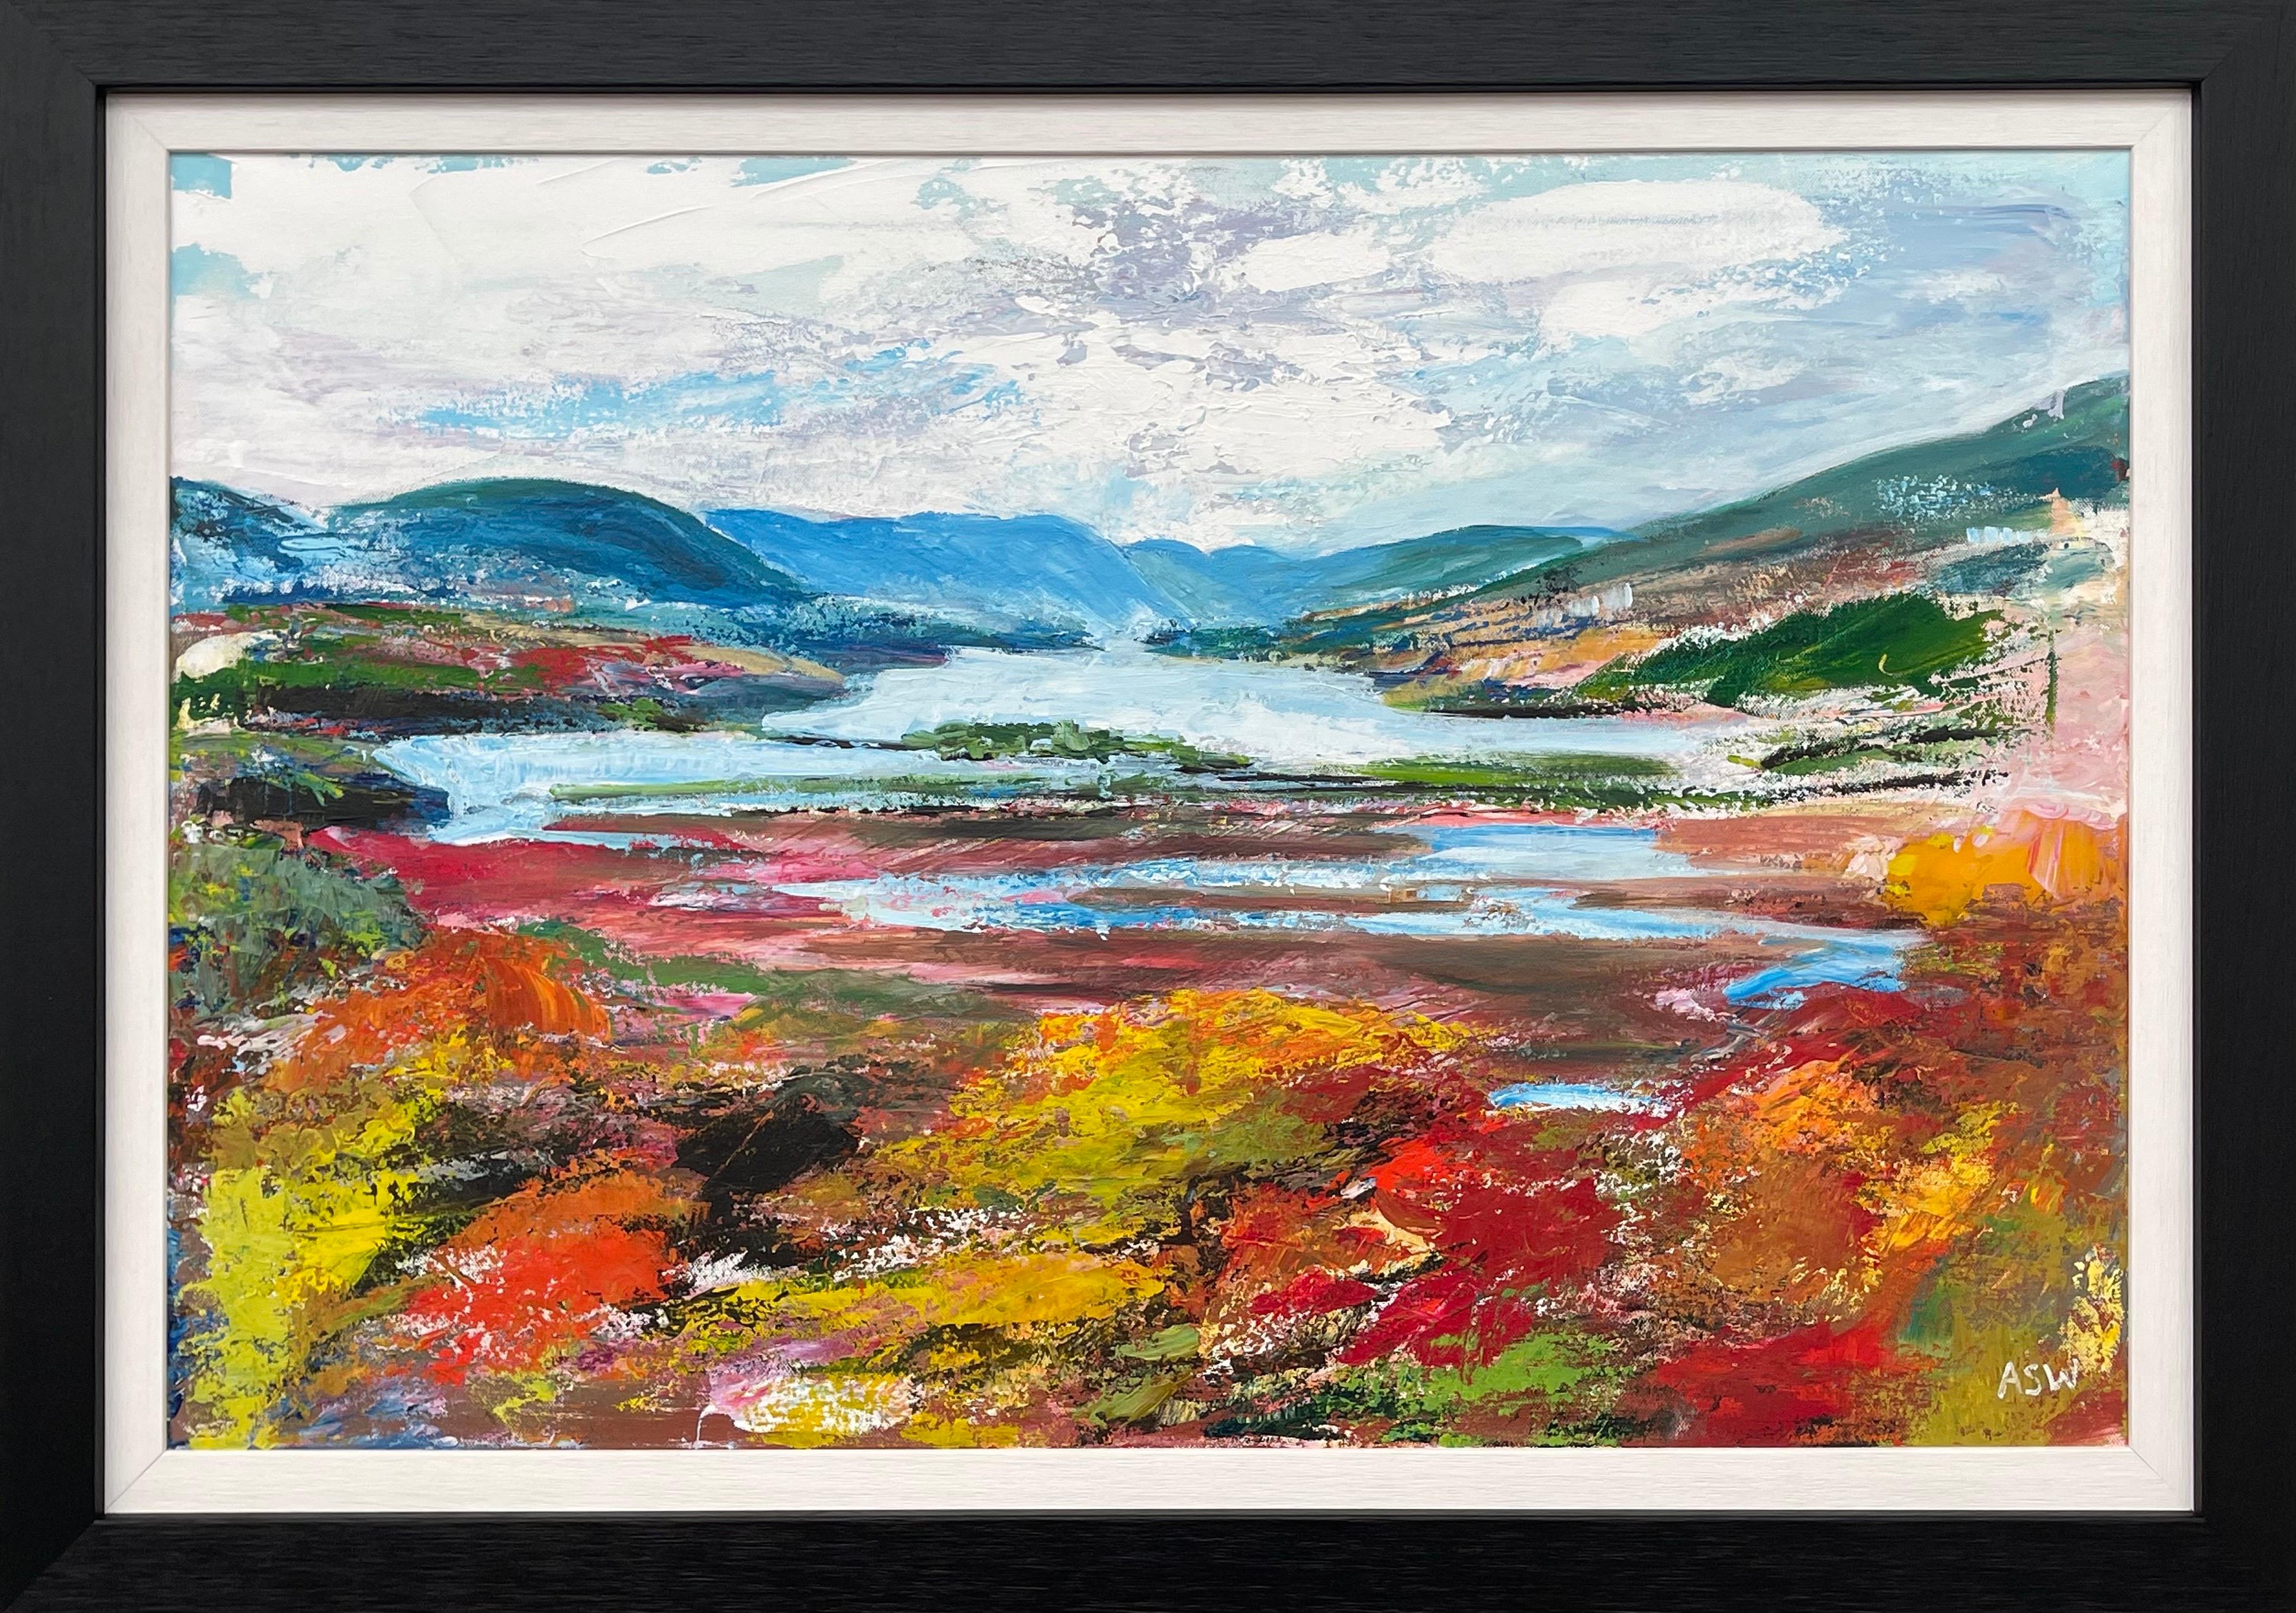 Colourful Abstract Landscape Painting of the Hudson River by Contemporary Artist